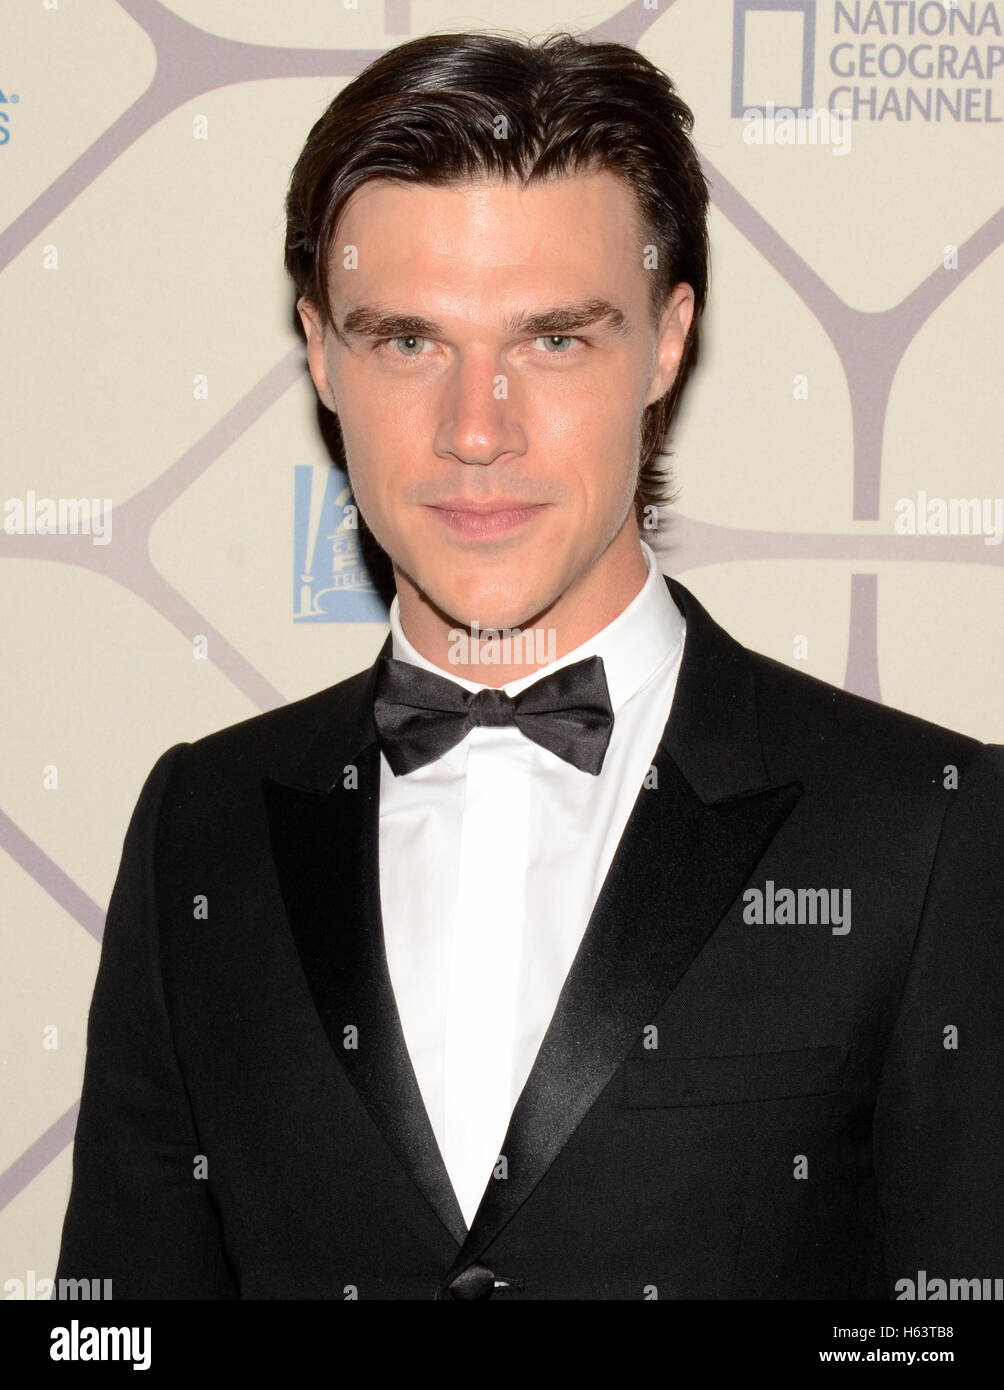 Actor Finn Wittrock attends the 67th Primetime Emmy Awards Fox after party on September 20, 2015 in Los Angeles, California. Stock Photo